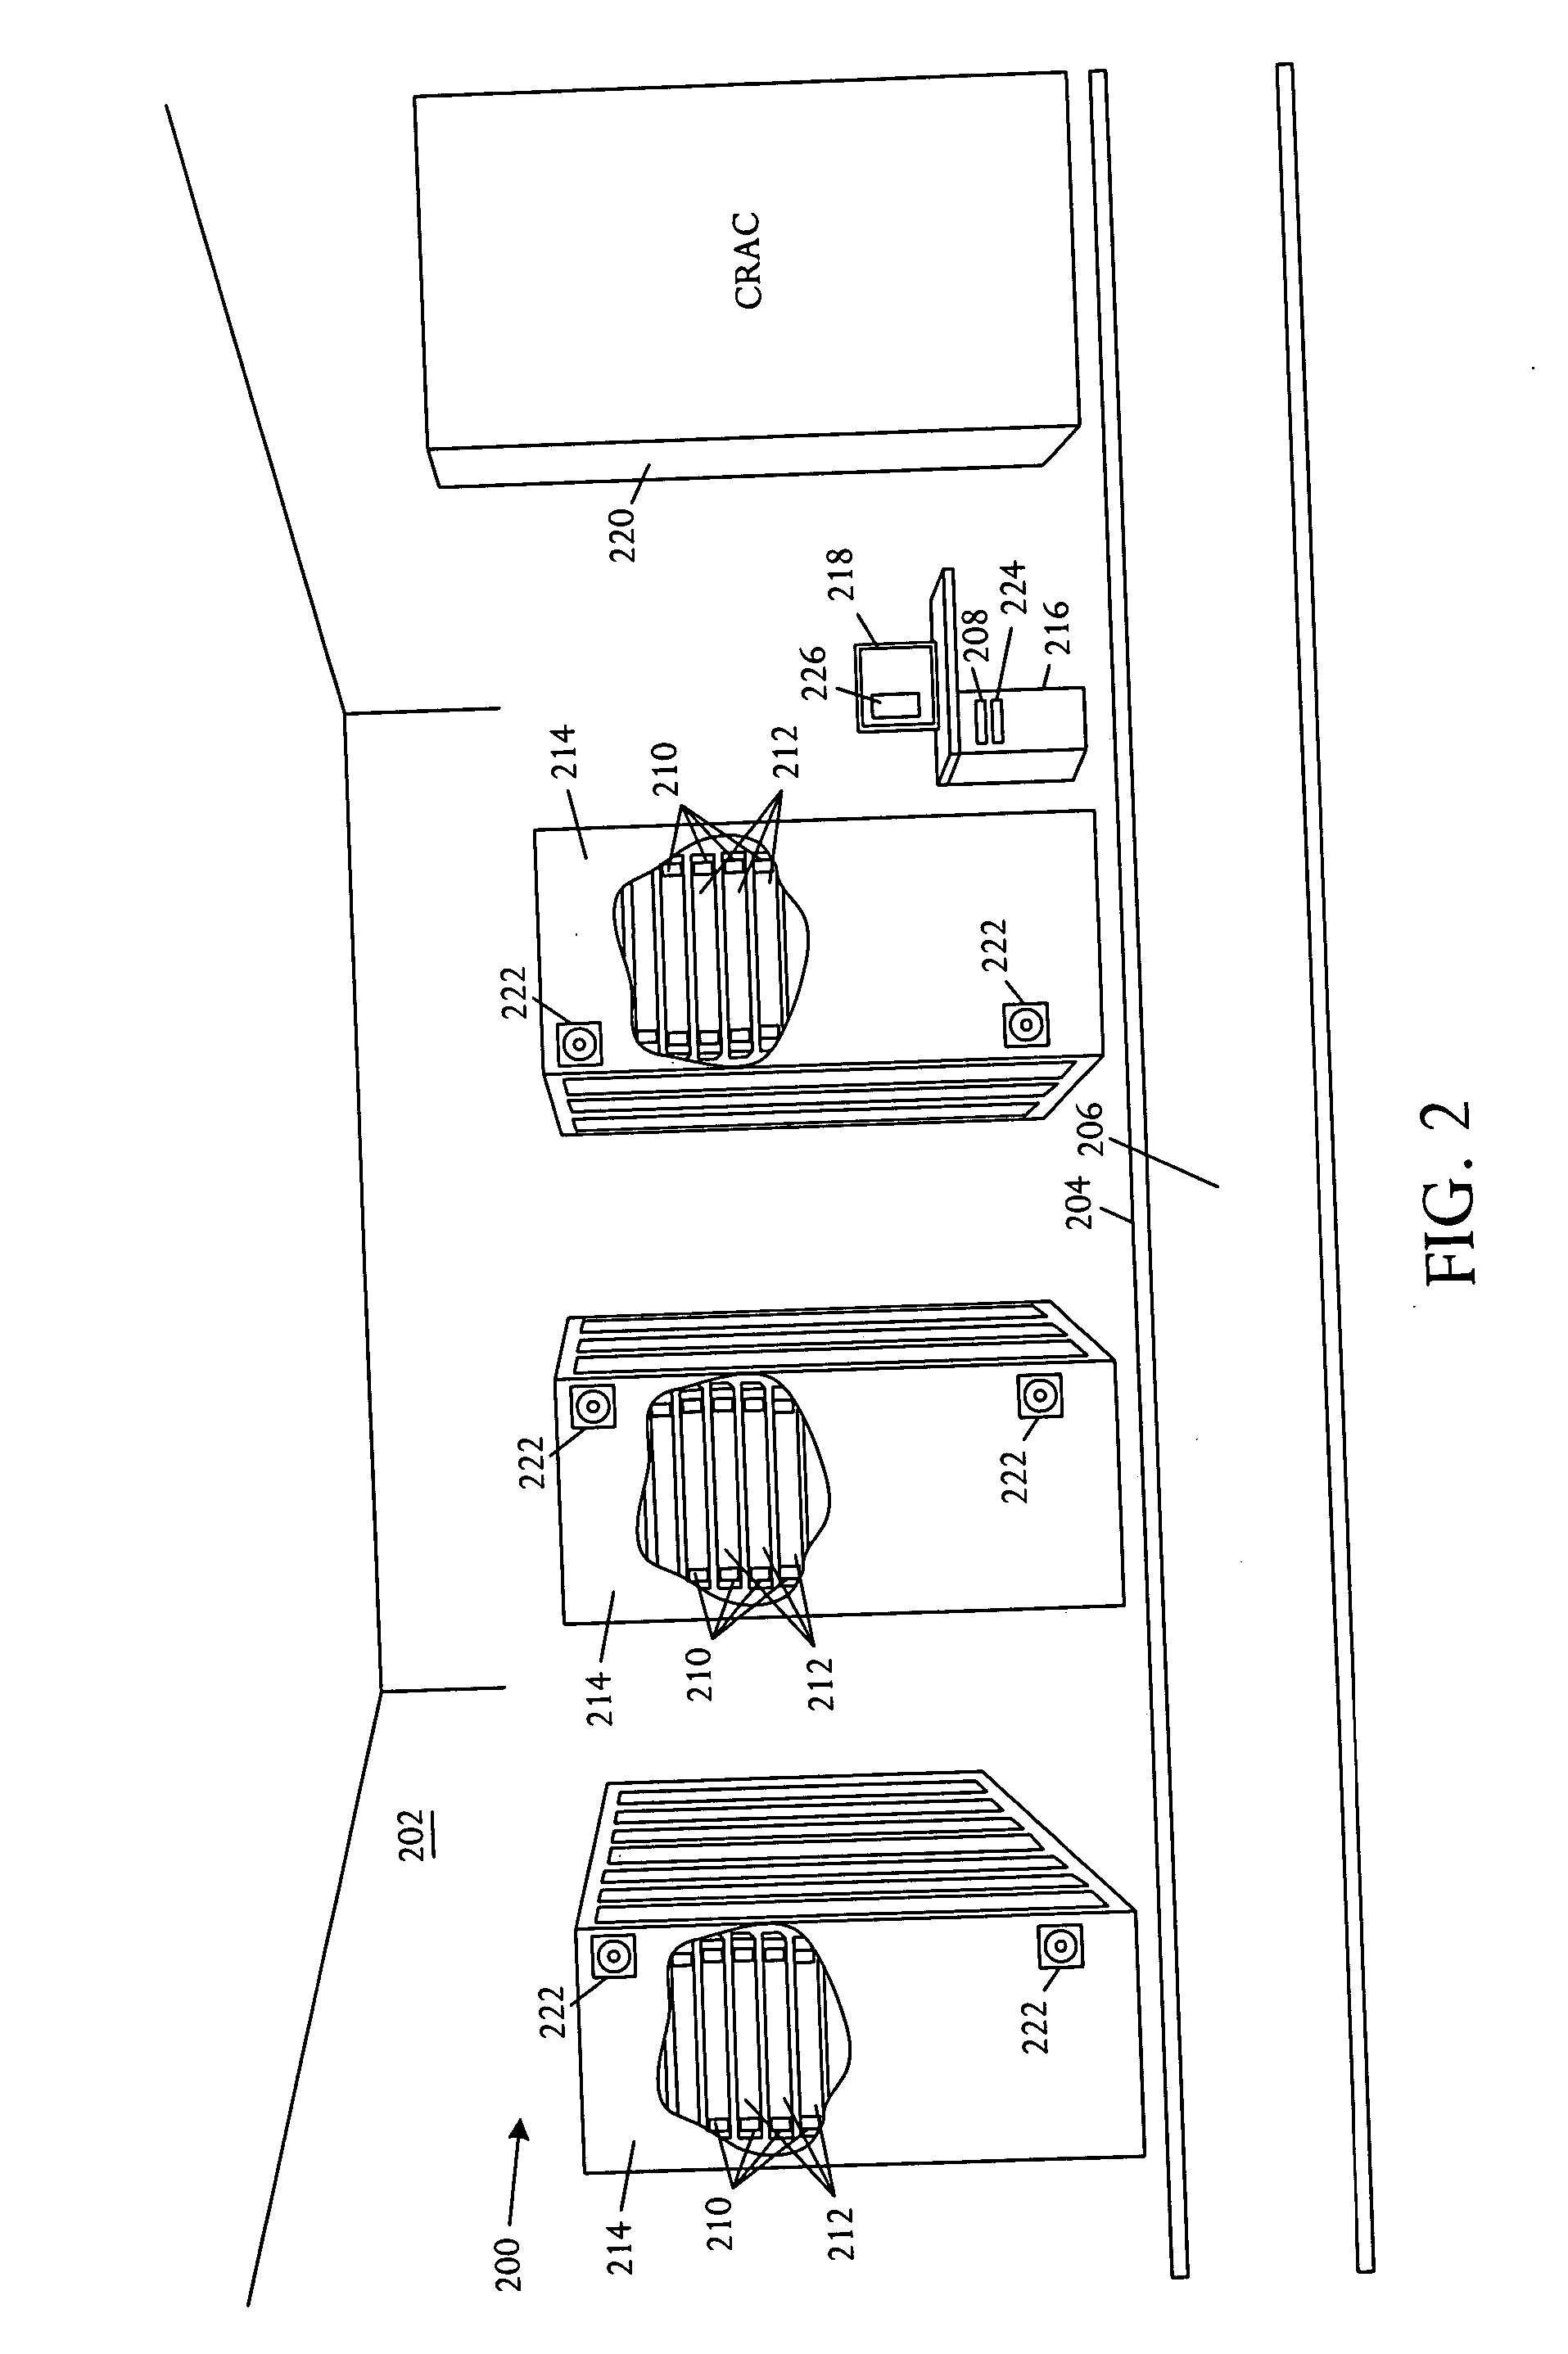 Thermal and power management apparatus